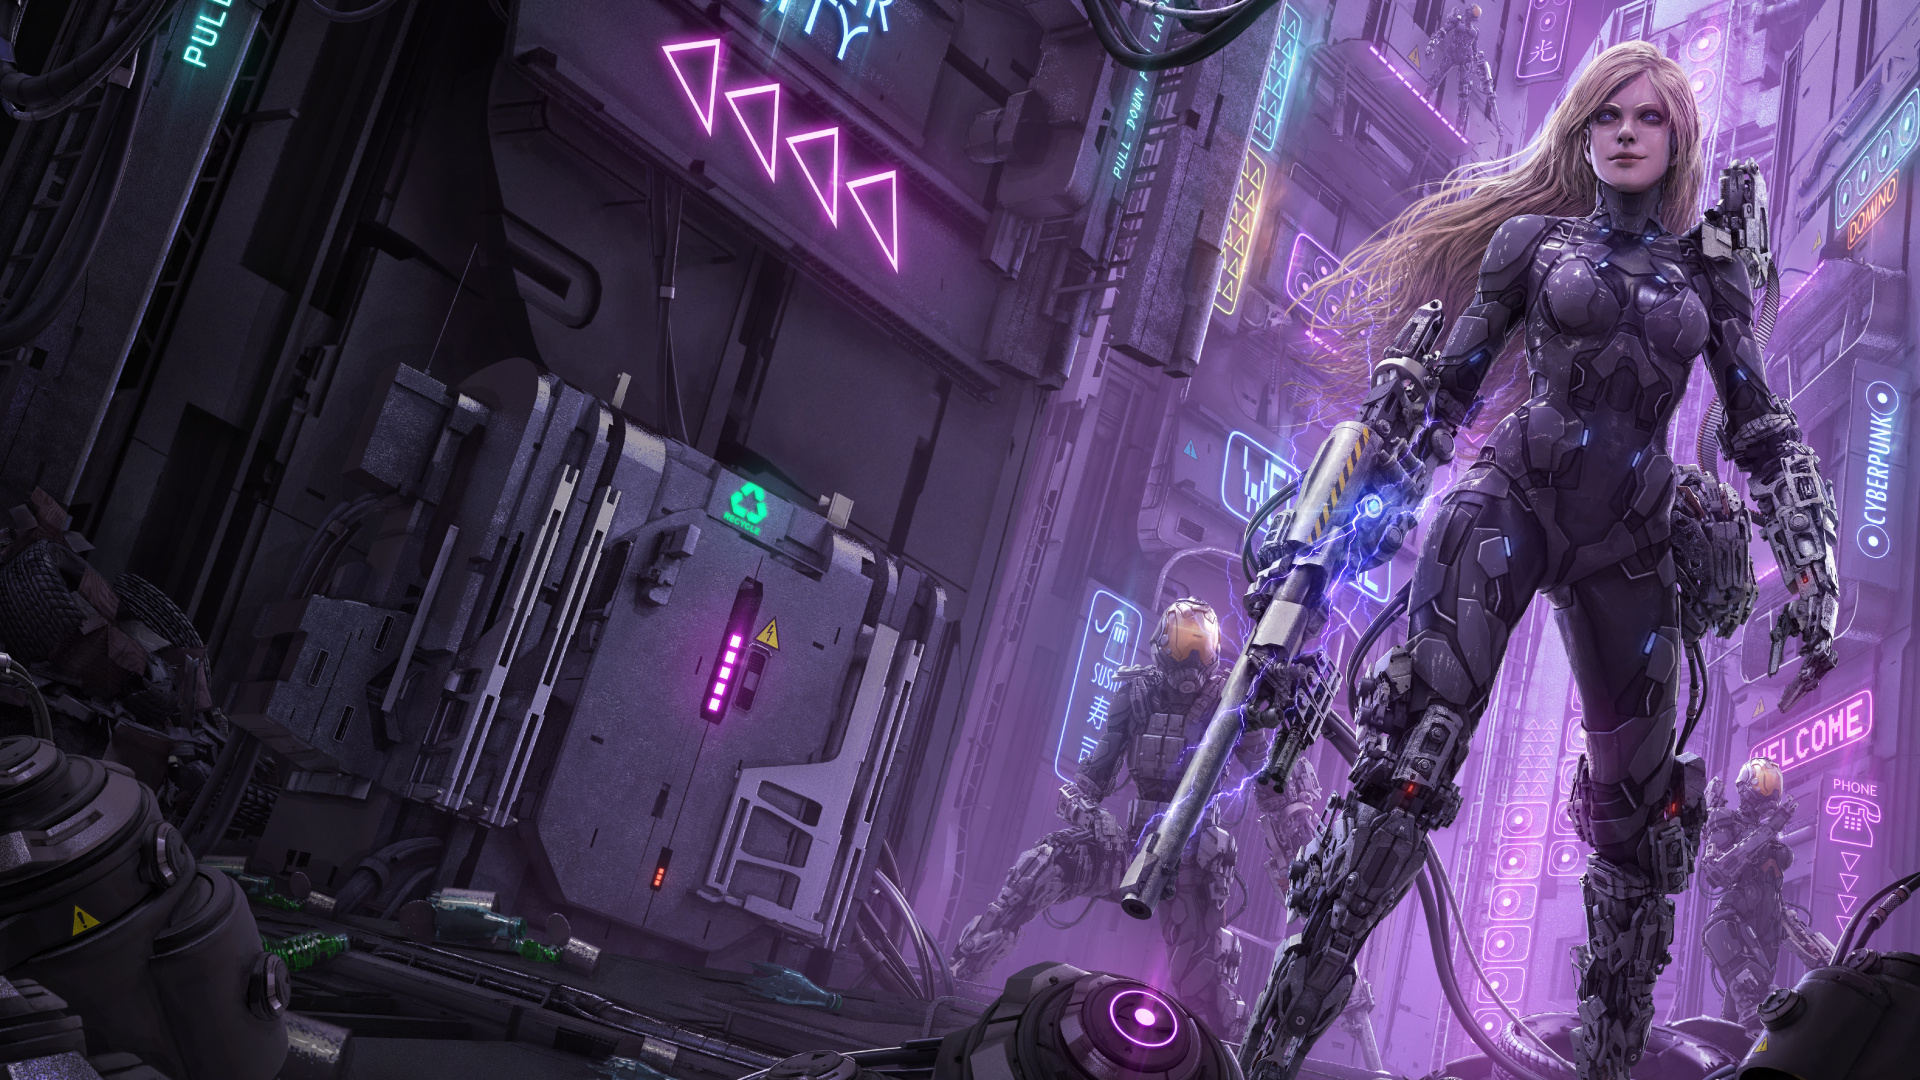 Cyberpunk, Science Fiction, Purple, pc Game, Games. Wallpaper in 1920x1080 Resolution